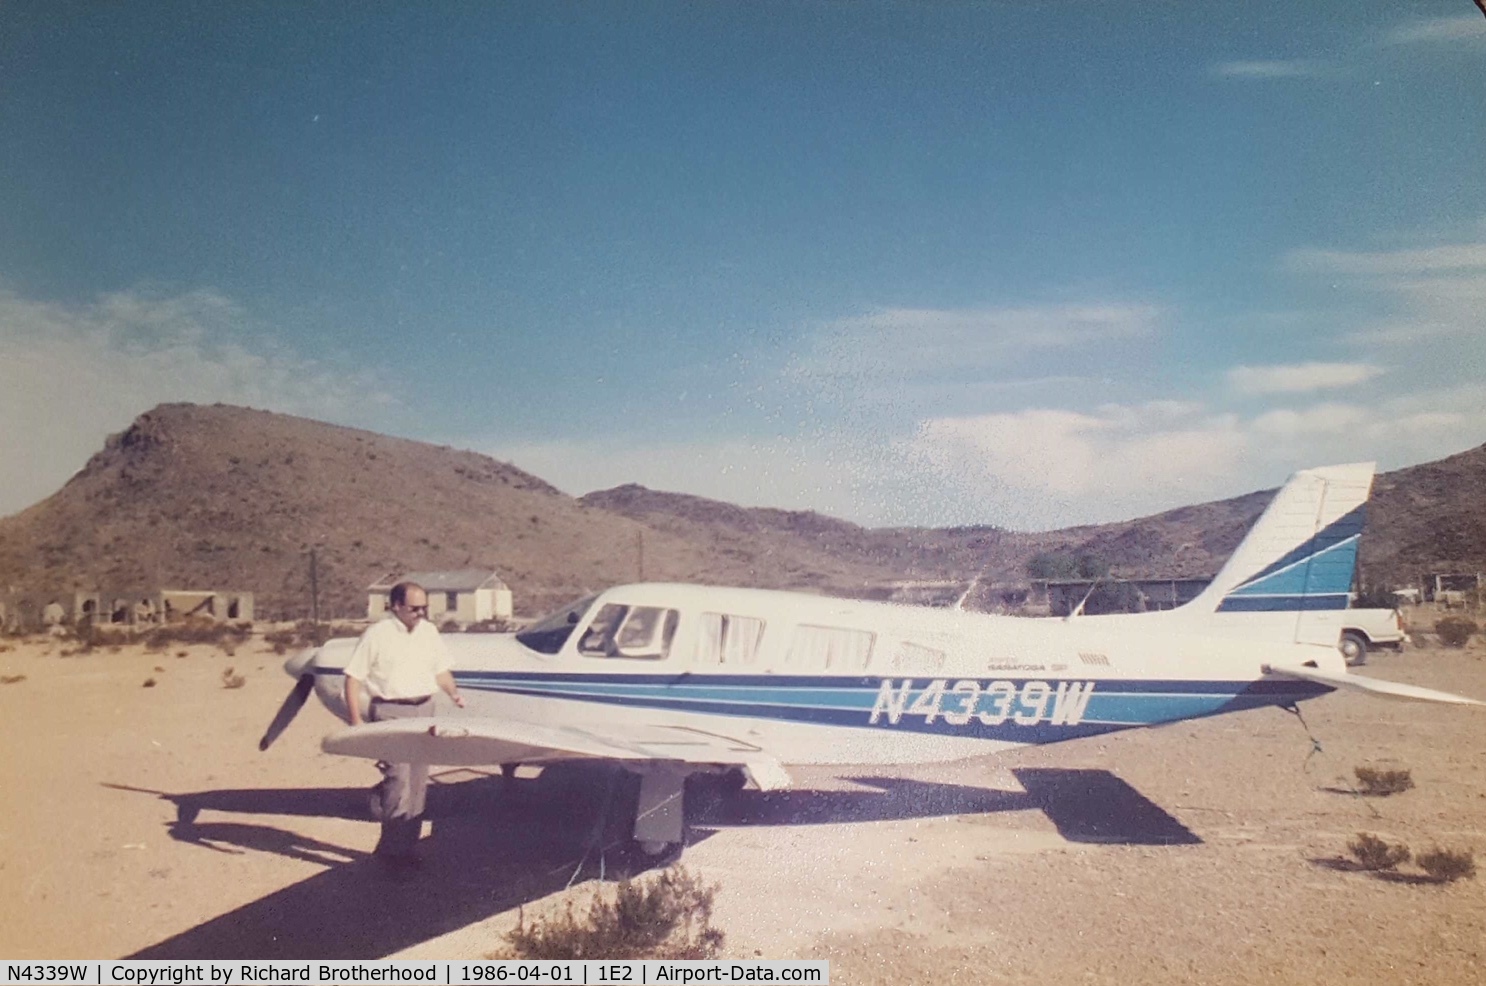 N4339W, 1983 Piper PA-32R-301 Saratoga C/N 32R-8413008, I flew this Saratoga from THV (Thomasville, PA) to 1E2 (Terlingua, TX) and back in 1986. Great airplane. Pilot: Roy Brotherhood